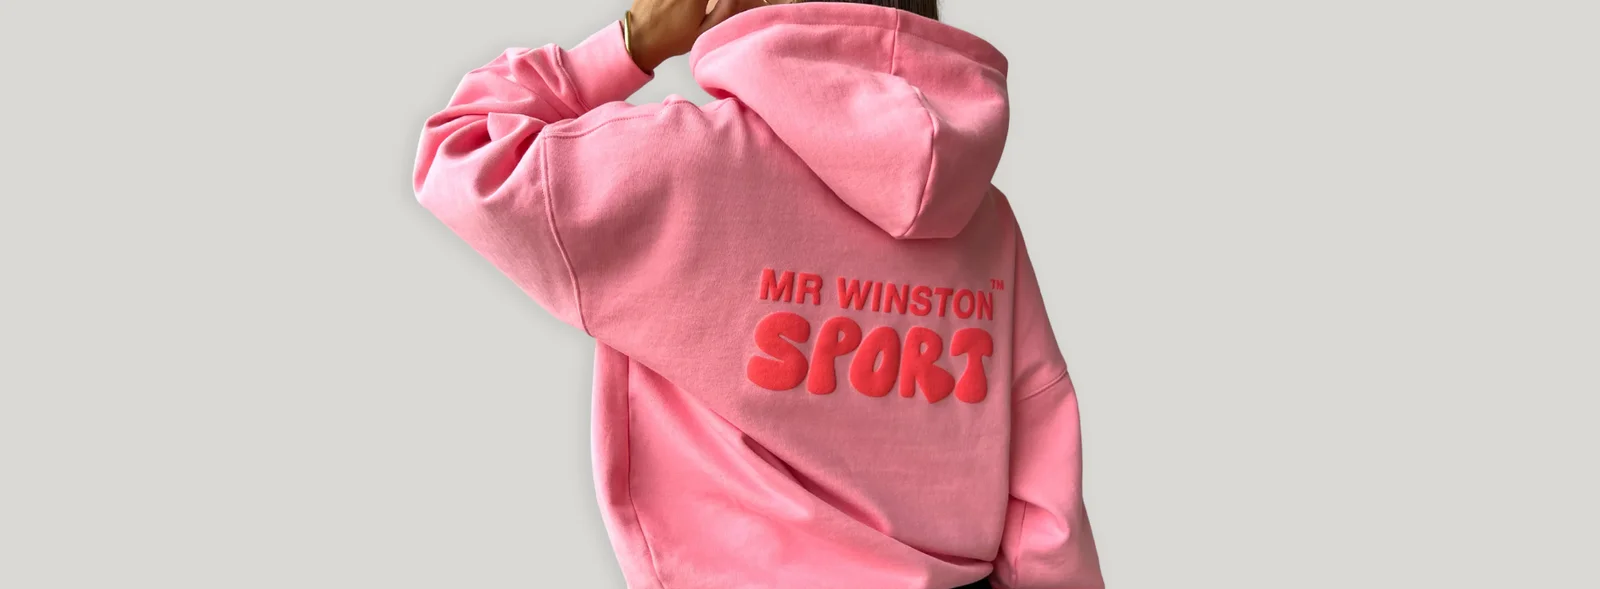 Each piece is created using premium materials, ensuring durability and a luxurious feel. Mr Winston stands out not only for its fashionable aesthetics but also for its commitment to sustainability and ethical manufacturing practices.